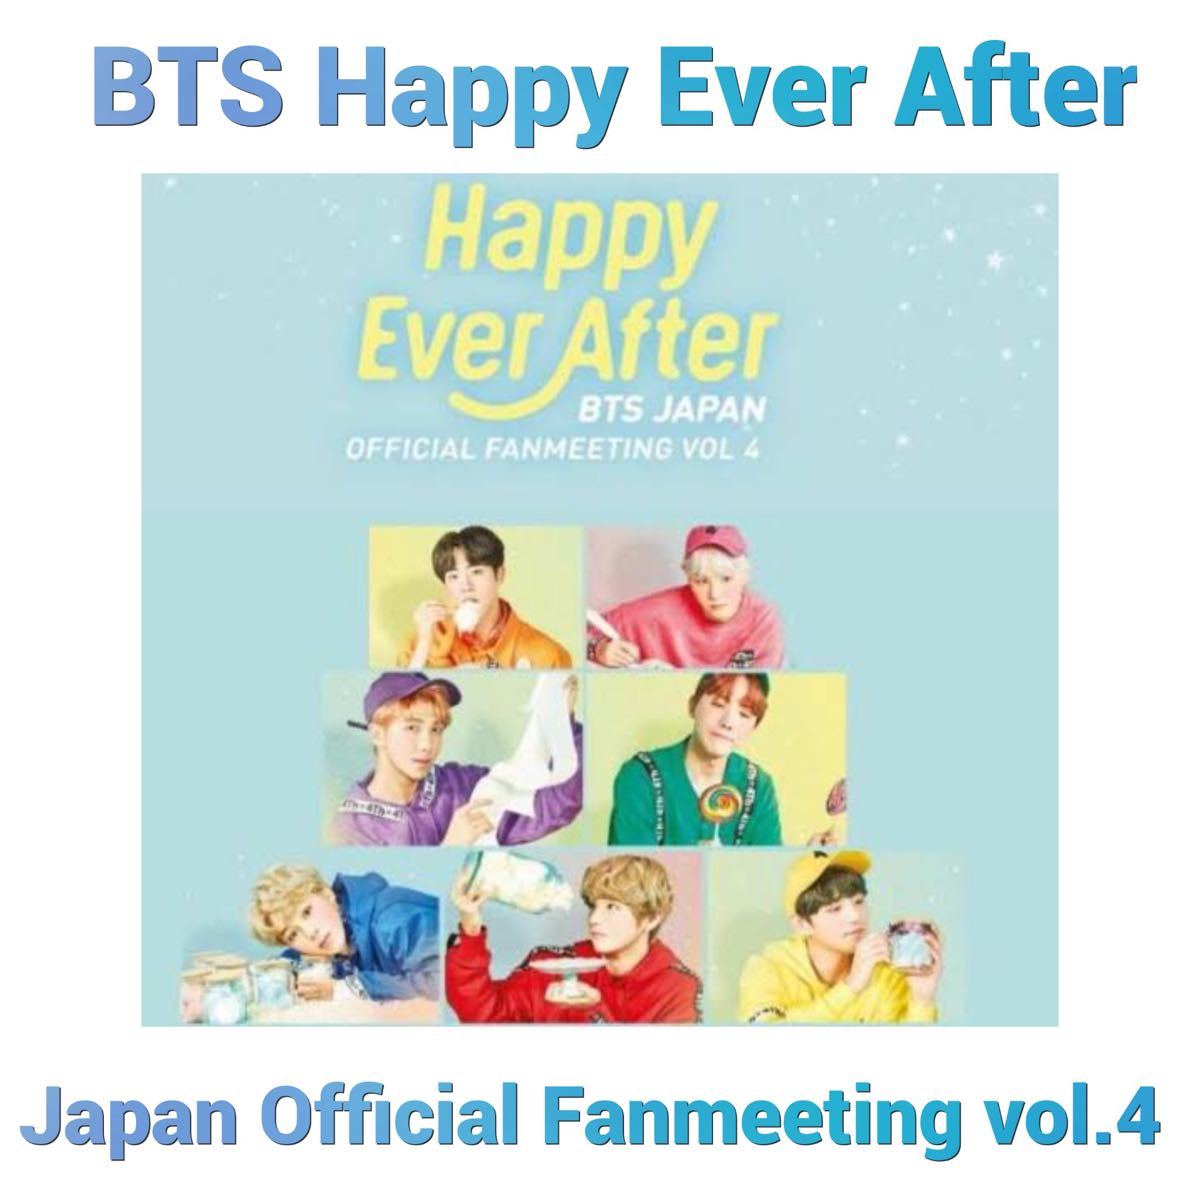 BTS JAPAN OFFICIAL FAN MEETING VOL.4 -Happy Ever After- DVD